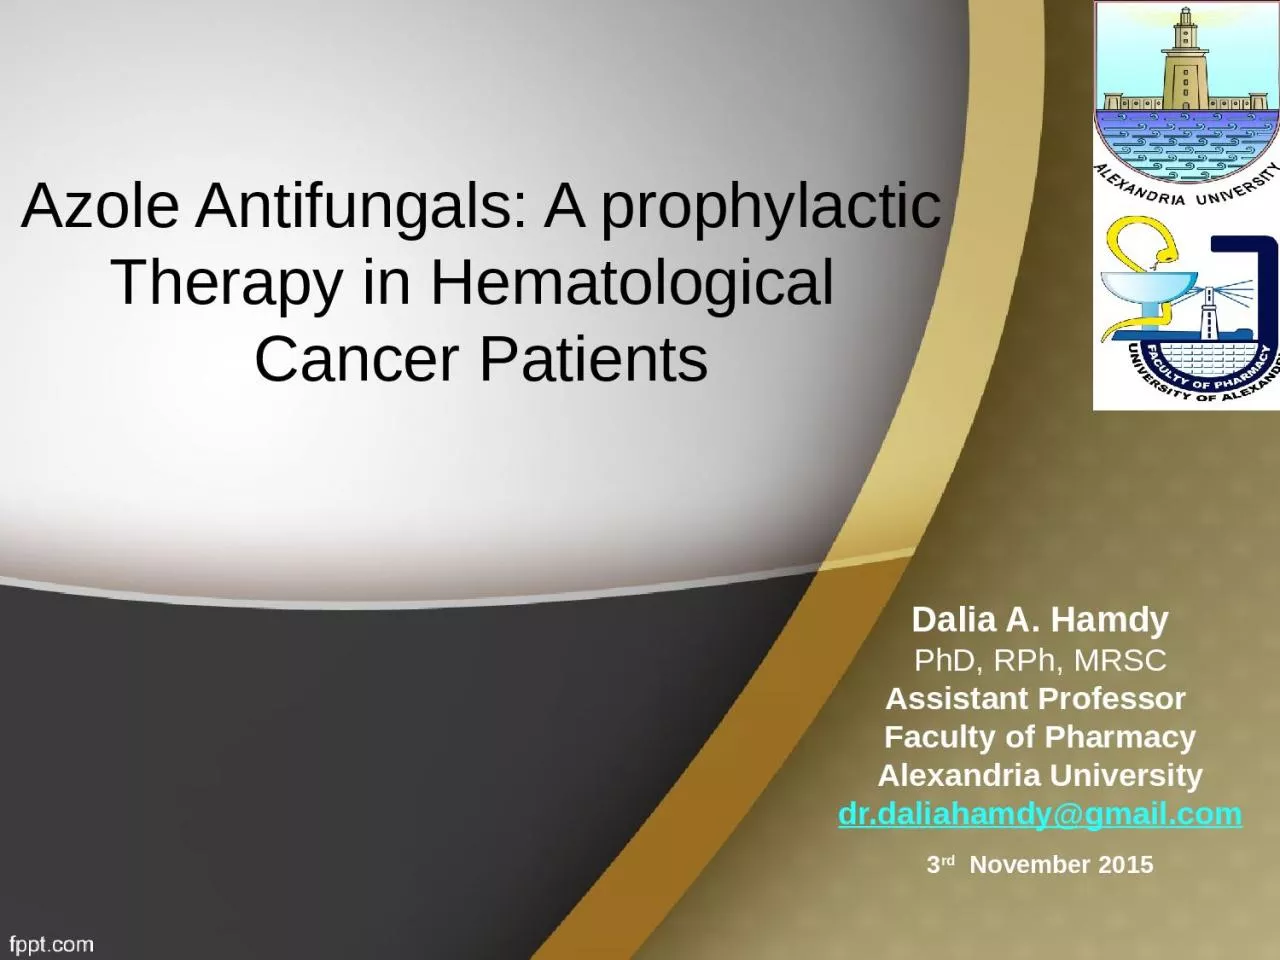 Azole Antifungals: A prophylactic Therapy in Hematological